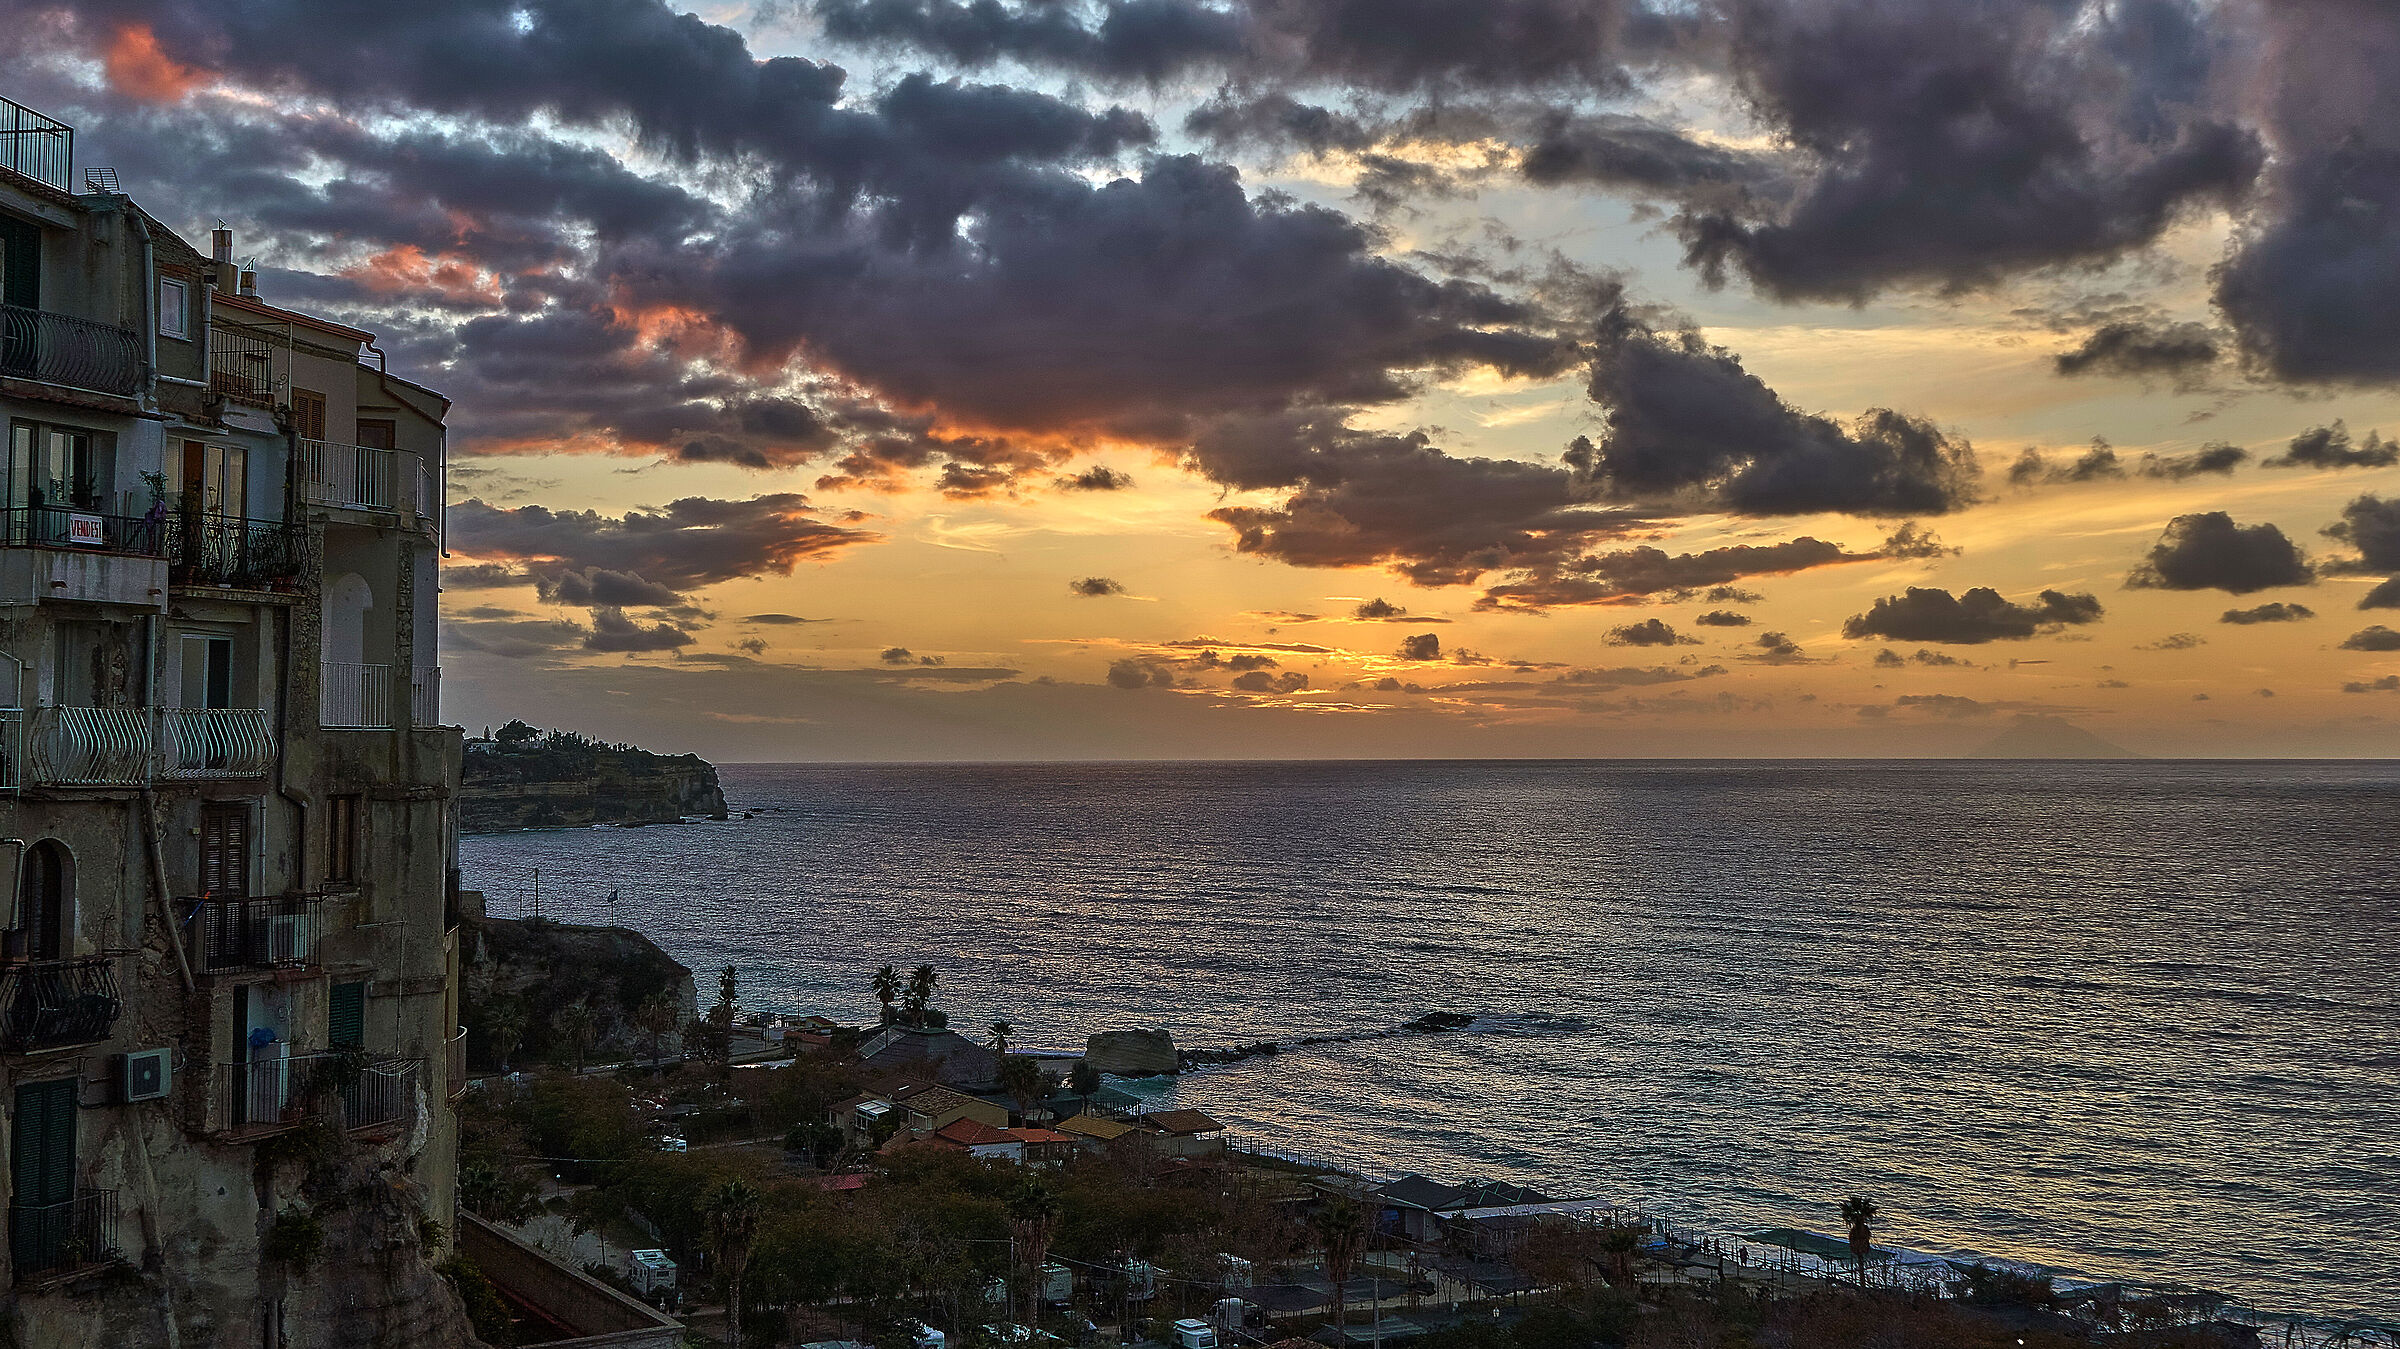 Glimpse of tropea at sunset 1...